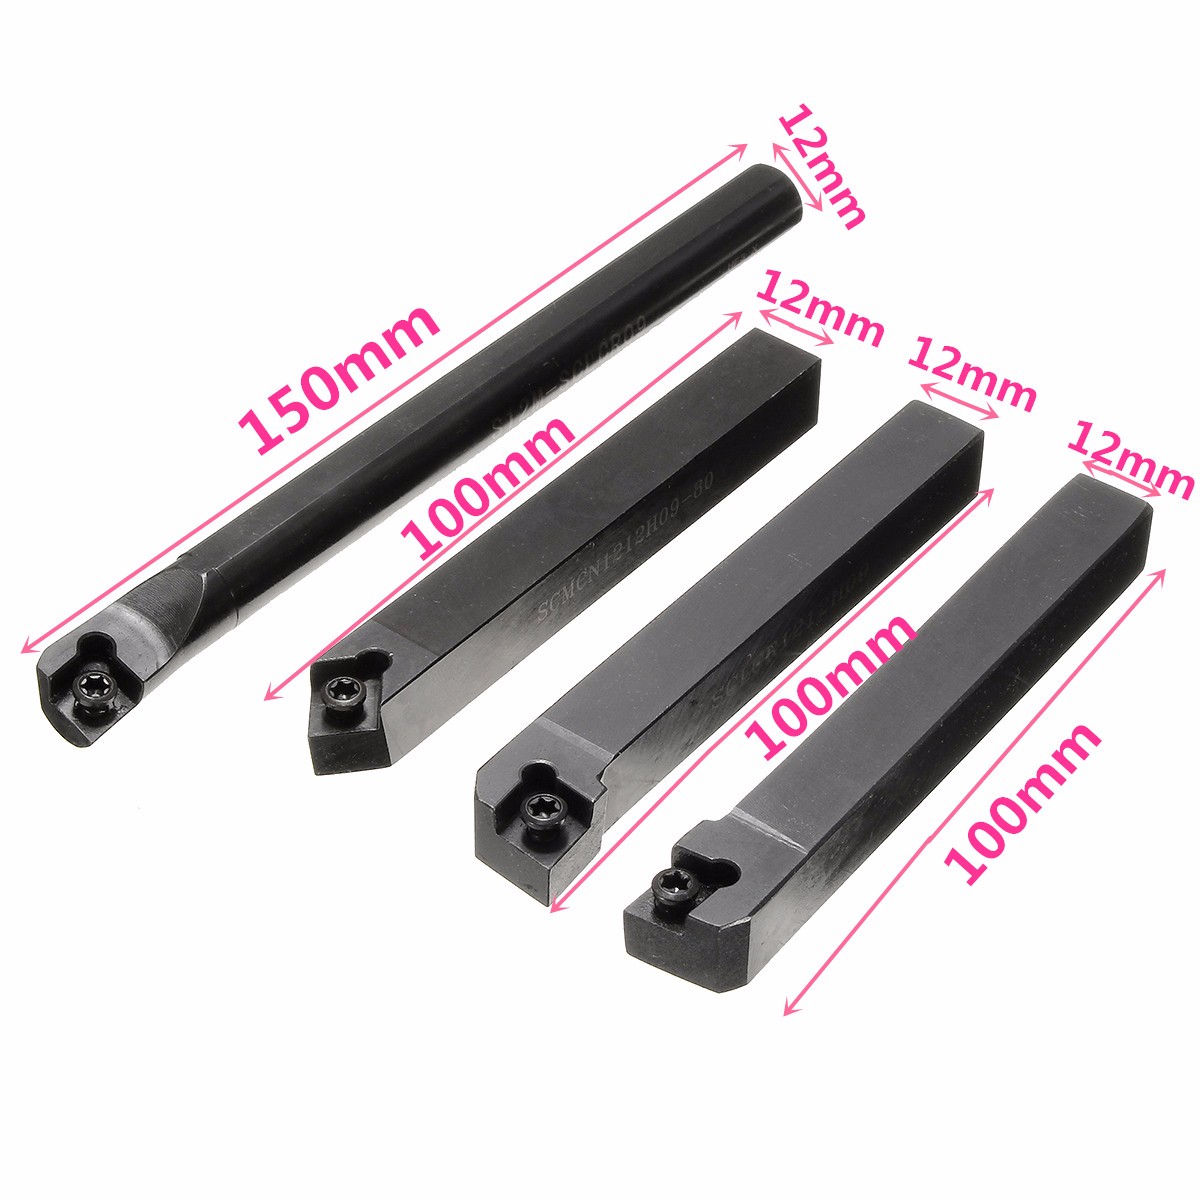 4pcs-SCLCRL-SCMCN-12mm-Lathe-Boring-Bar-Turning-Tool-Holder-With-10pcs-CCMT09T304-Carbide-Inserts-1088746-1